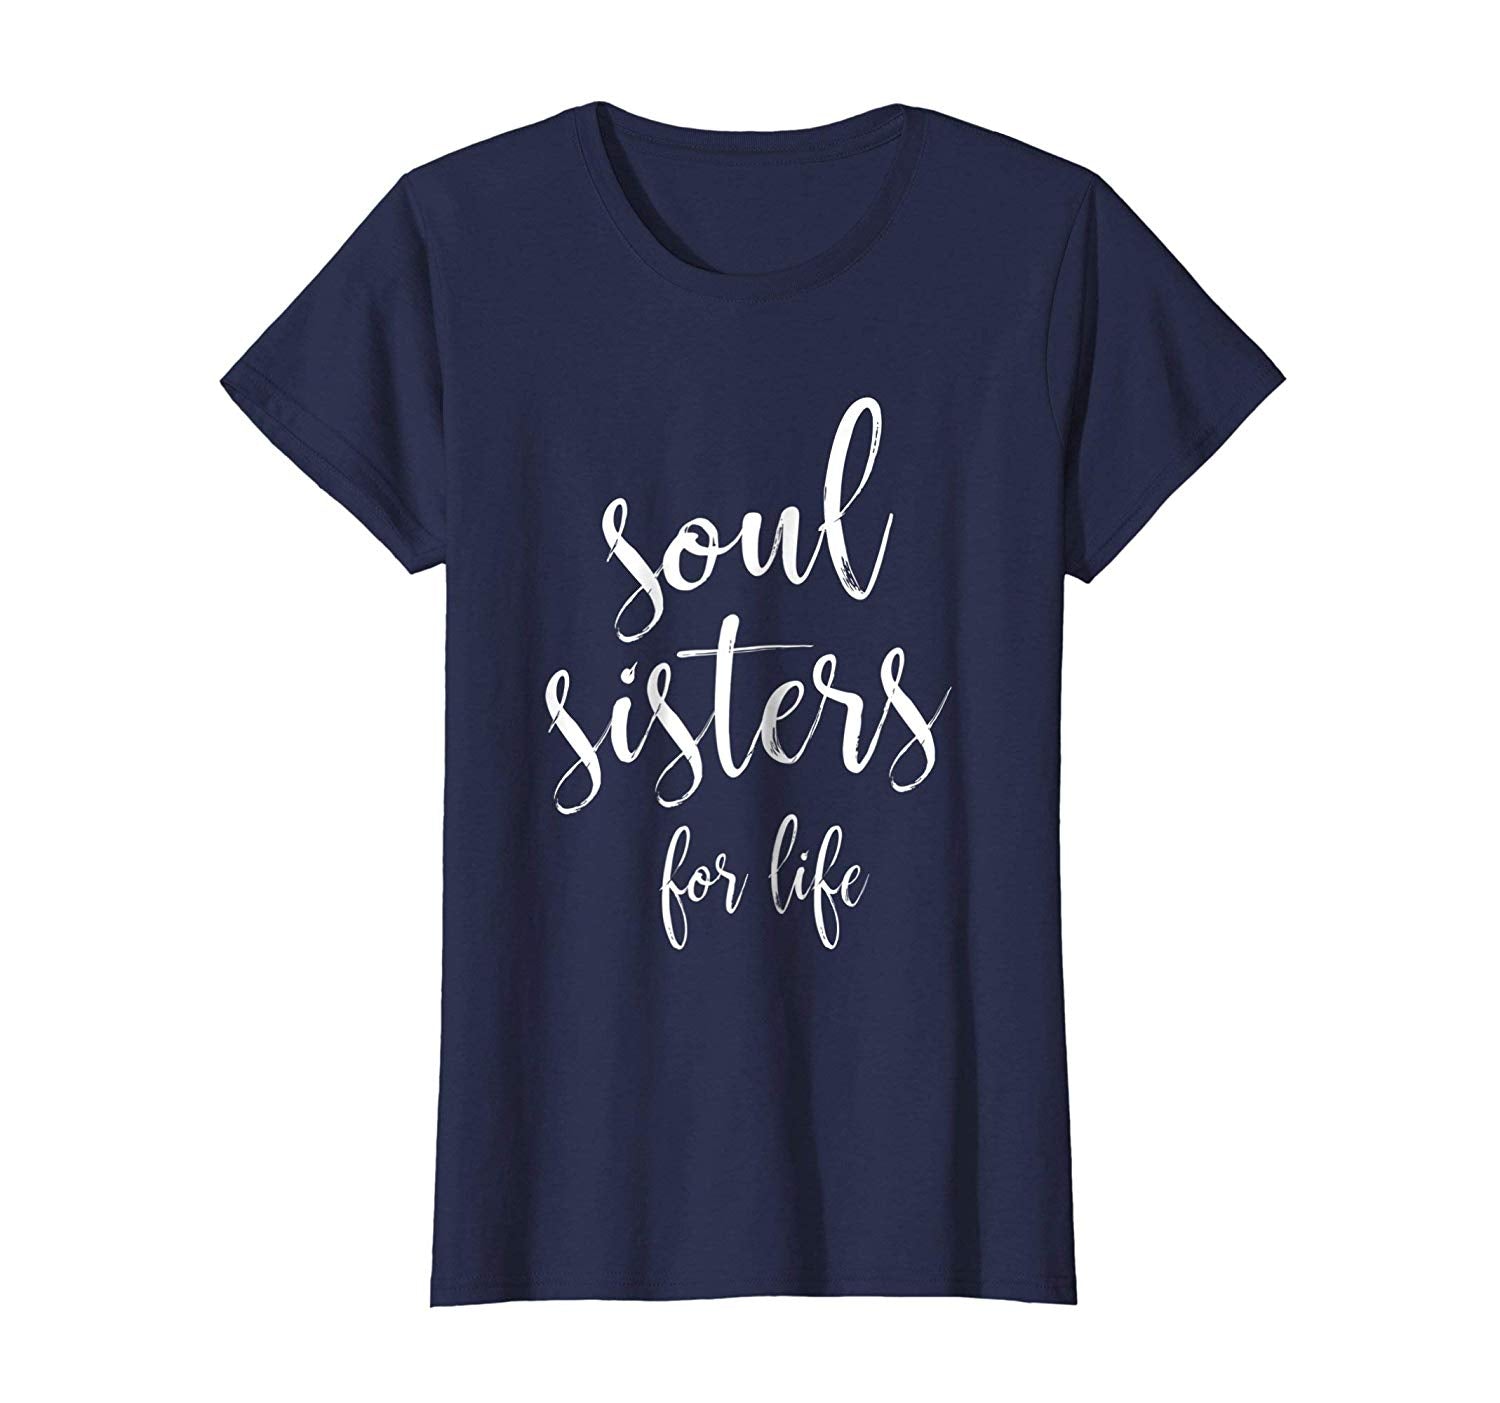 Soul Sisters Lovely Friendship and Bridal Shower Tee Shirts